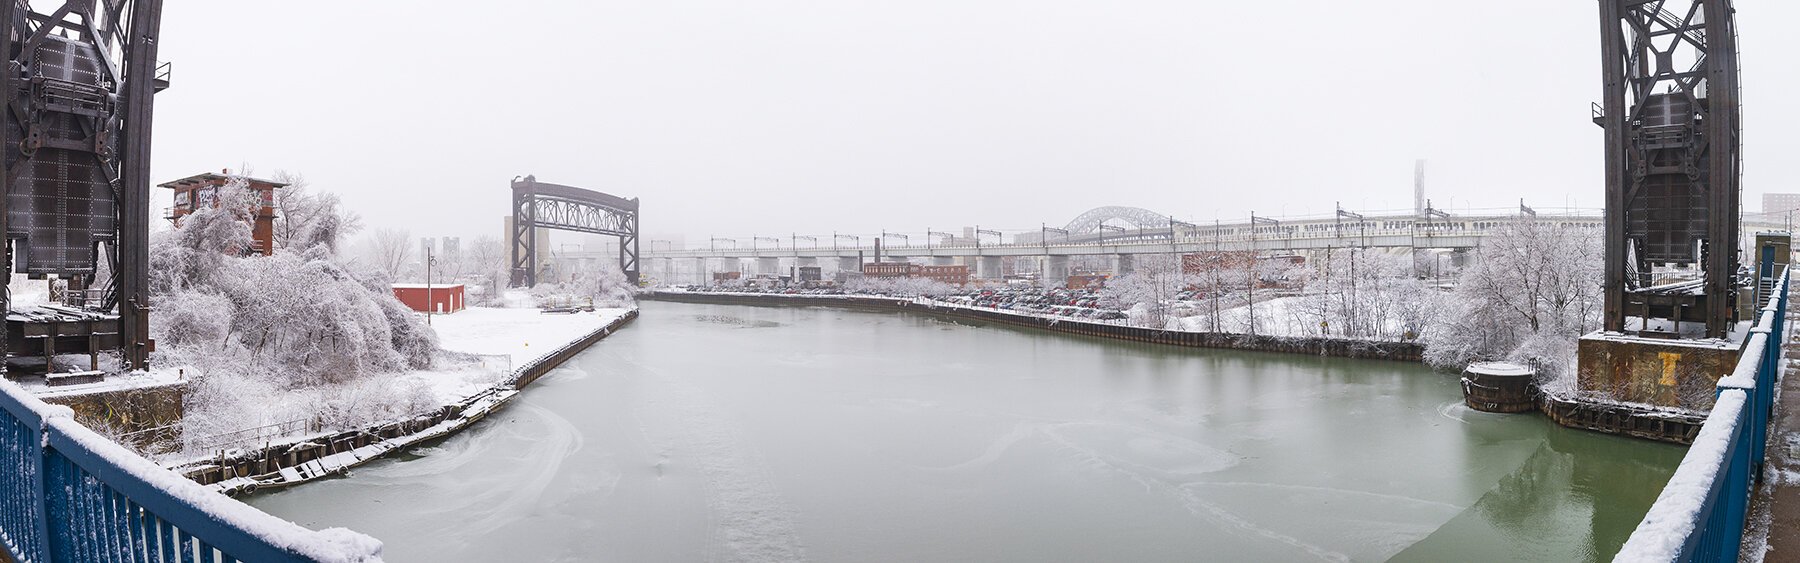 Winter on the Cuyahoga